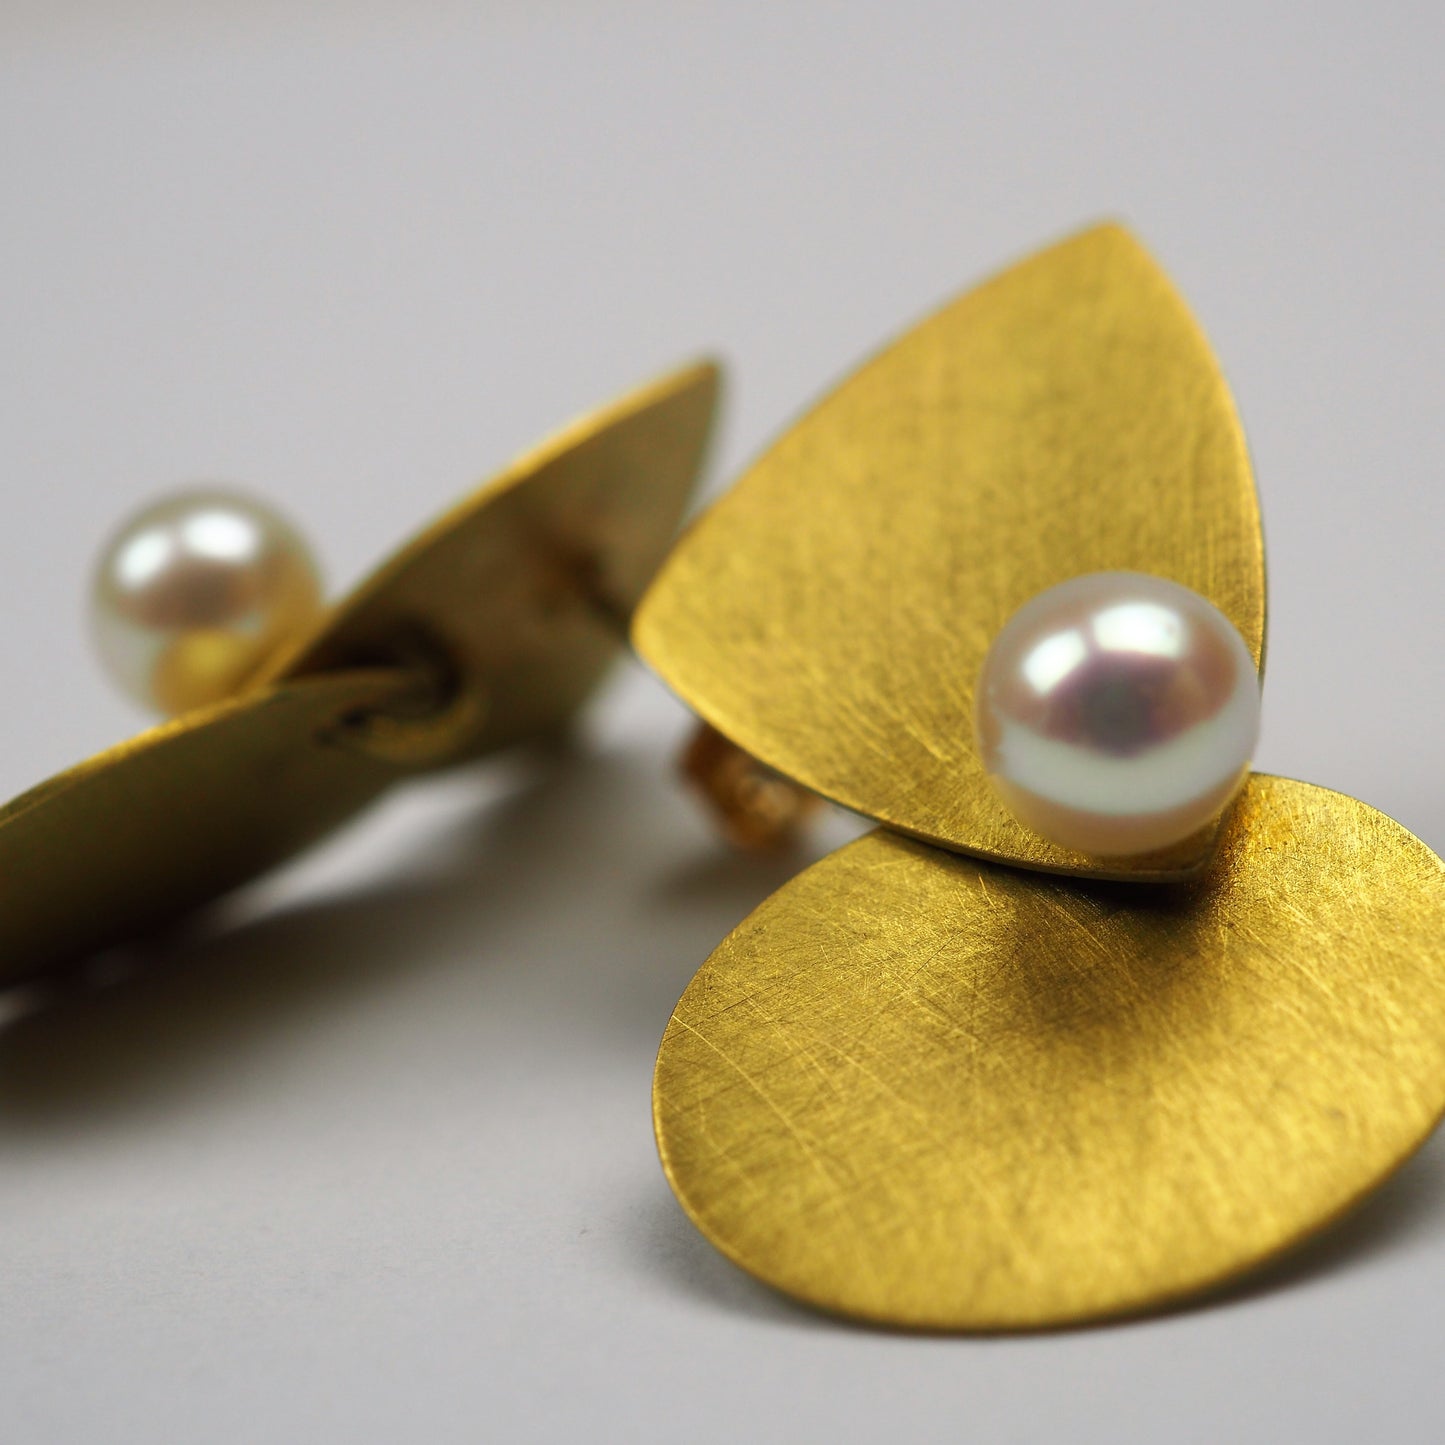 Krinos, Daphne – Yellow Gold and Pearl Earrings